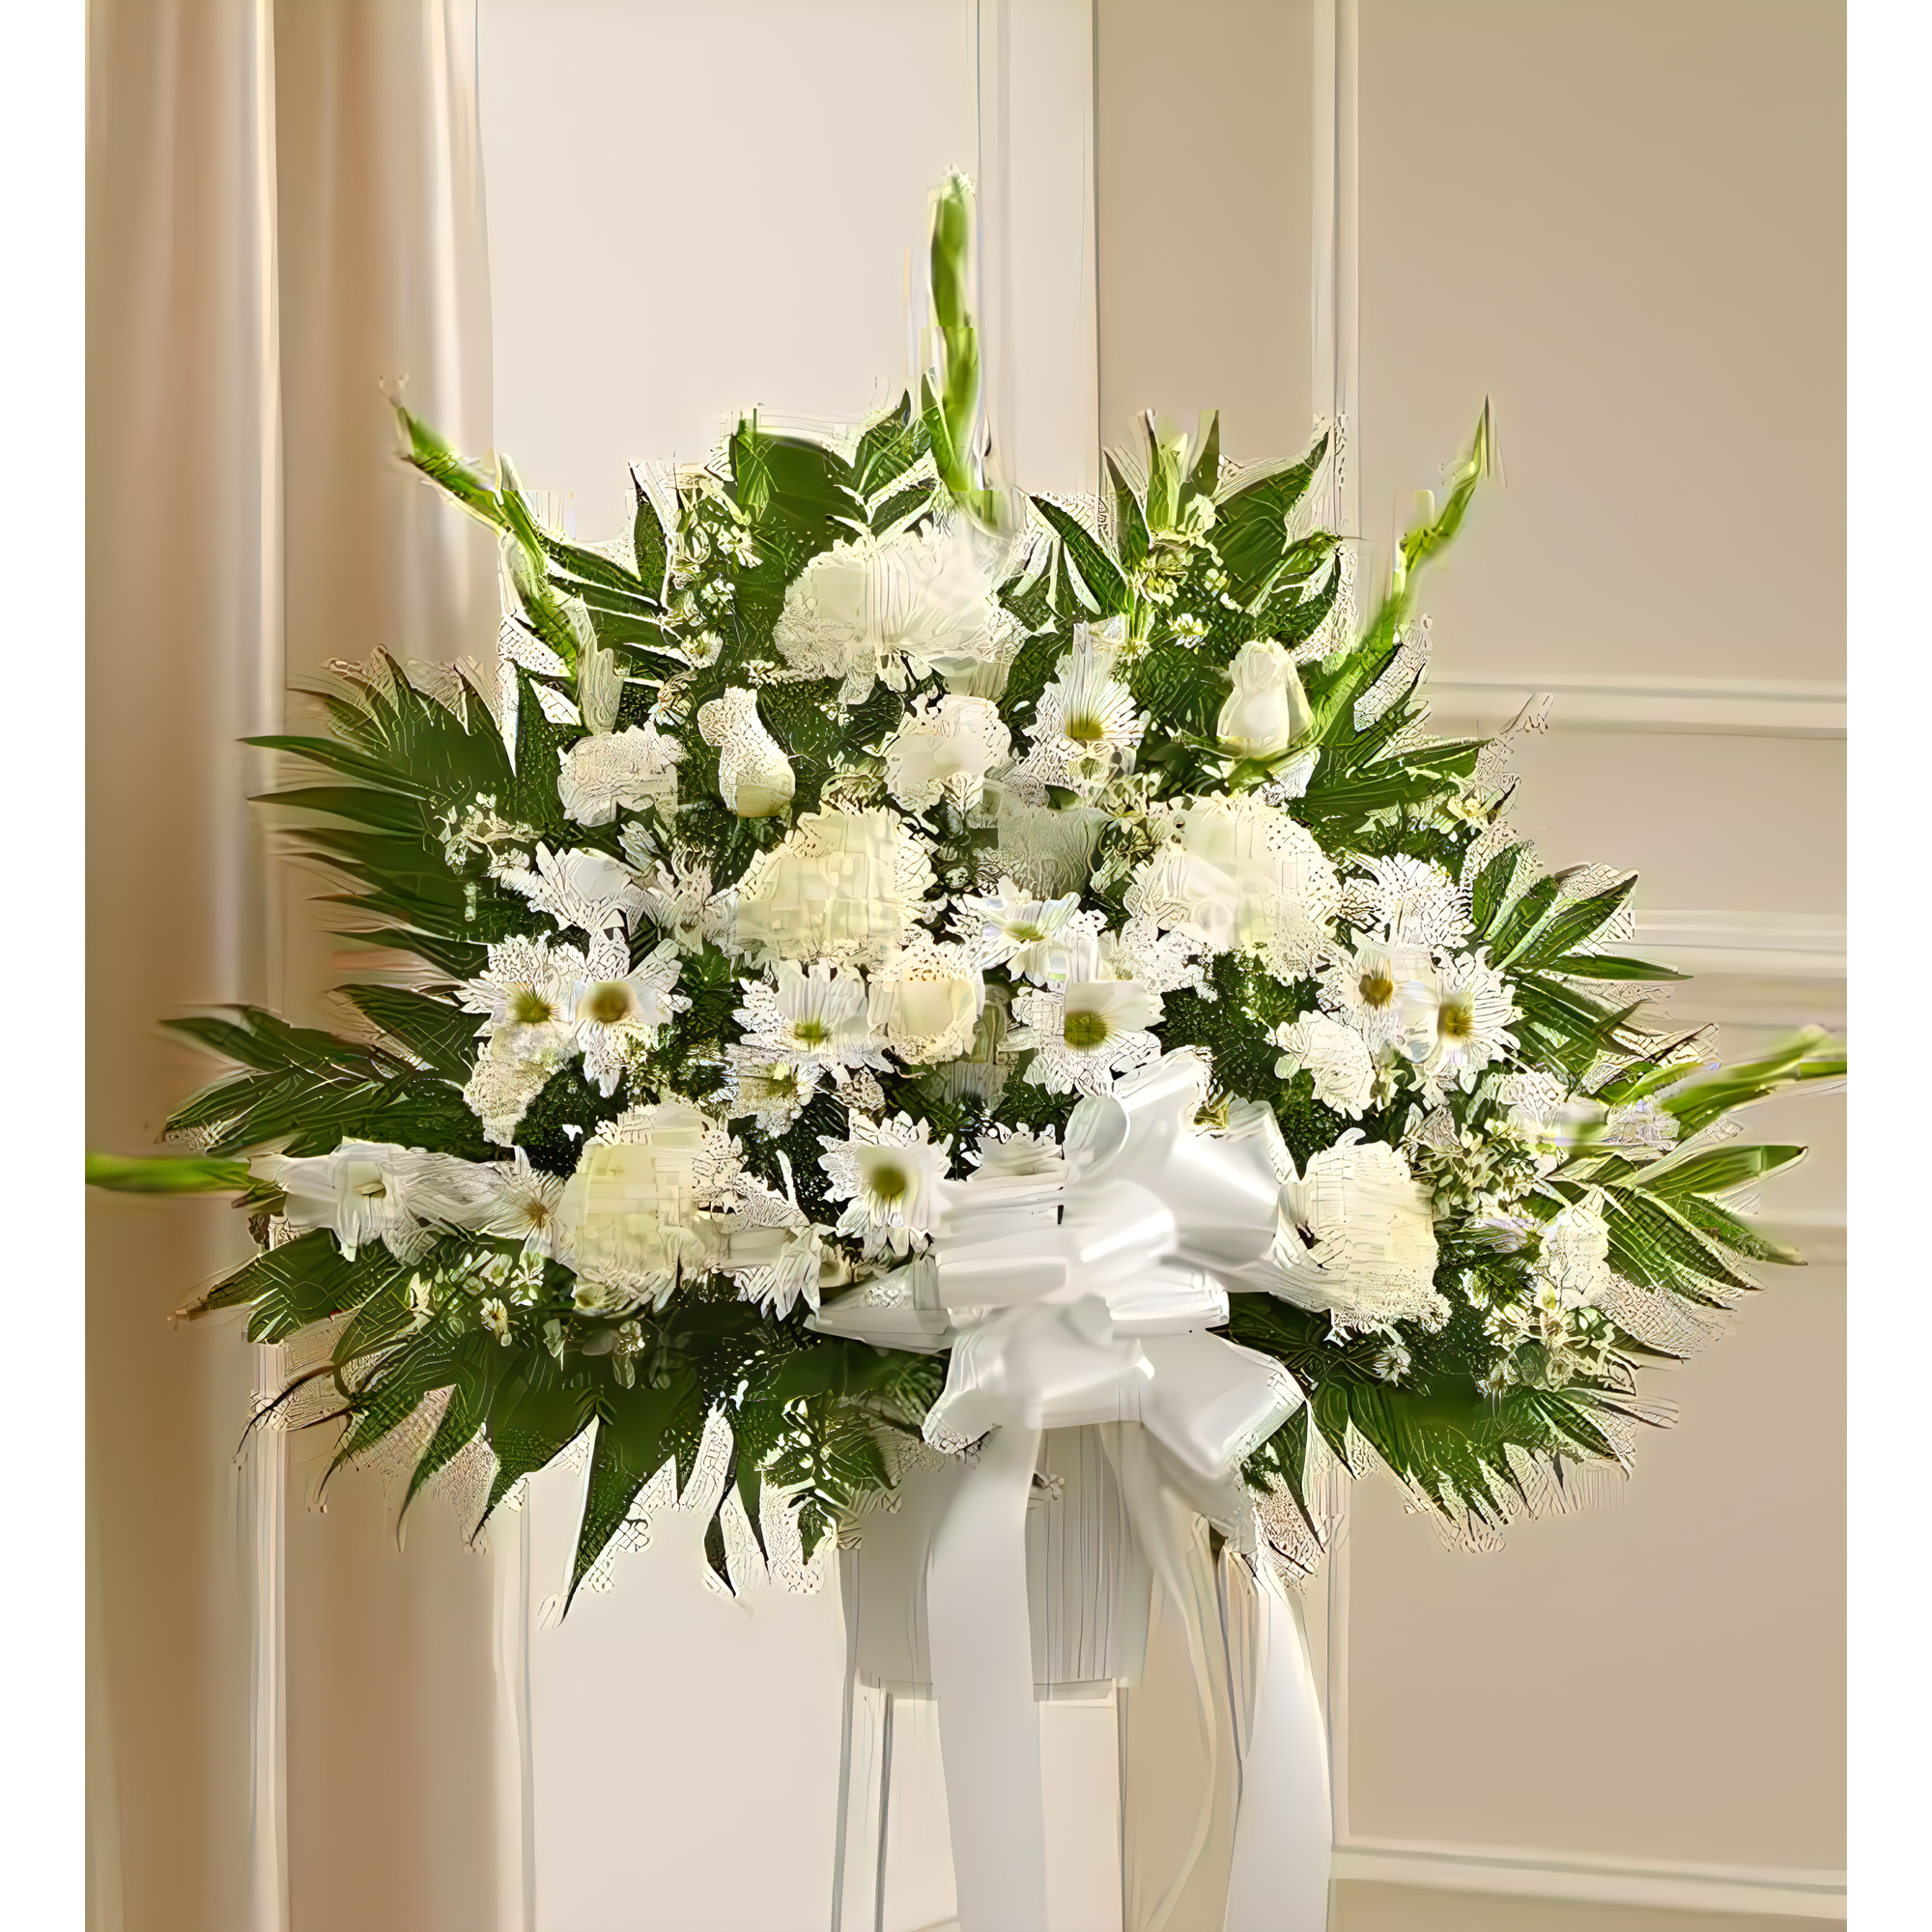 Heartfelt Sympathies White Standing Basket - Funeral > For the Service